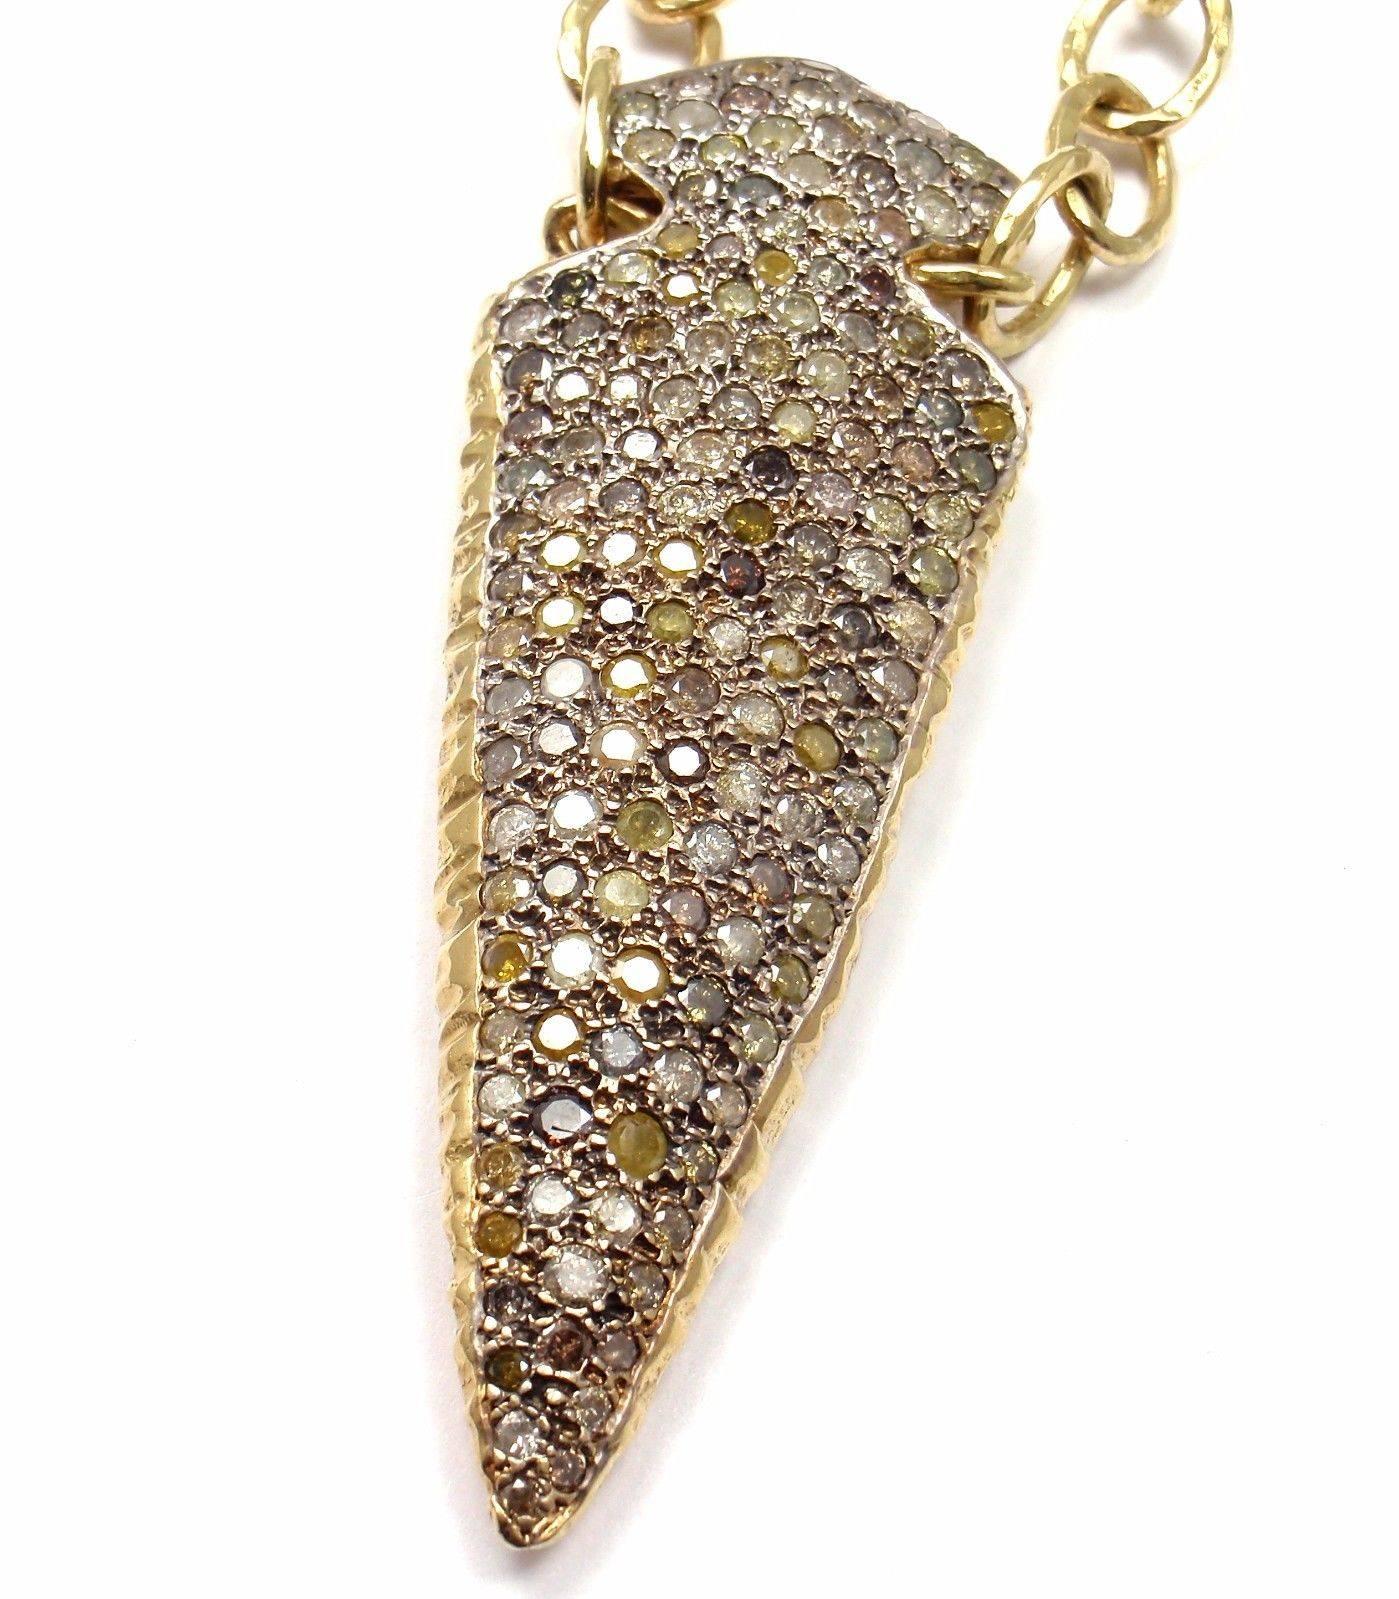 18k Yellow Gold Color Diamond Large Arrowhead Pendant Necklace by Loree Rodkin. 
With Round color diamonds estimated total diamond weight 6.50cts
This necklace used to belong to Jackie Collins and was 
purchased from her jewelry estate